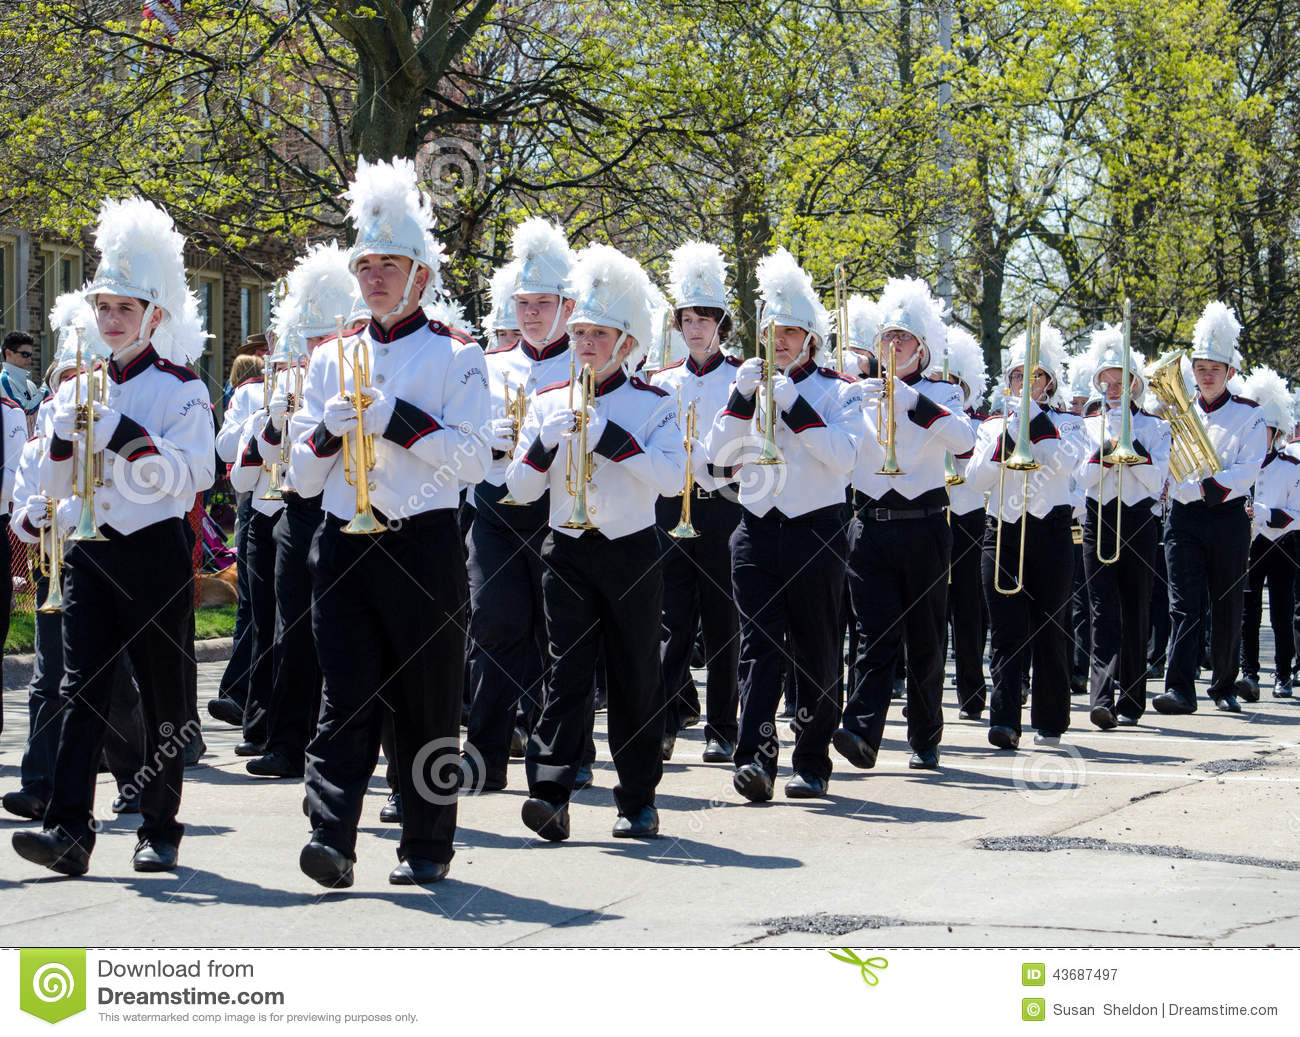 High School Students In Uniform Cary Wind Instruments And March During